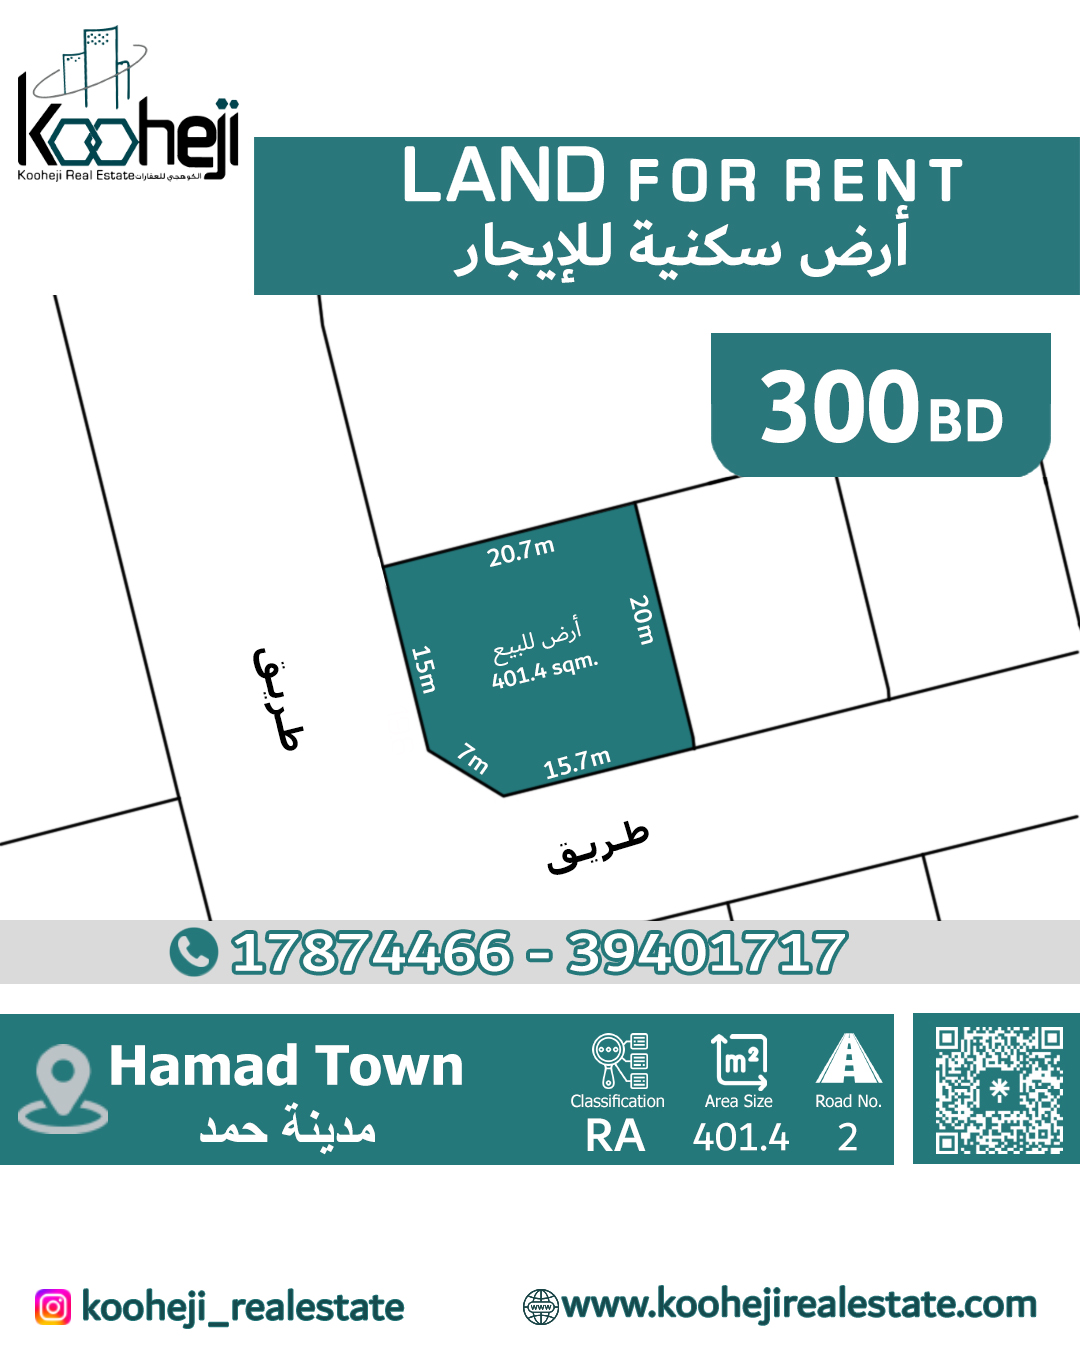 Land for Rent in Hamad Town